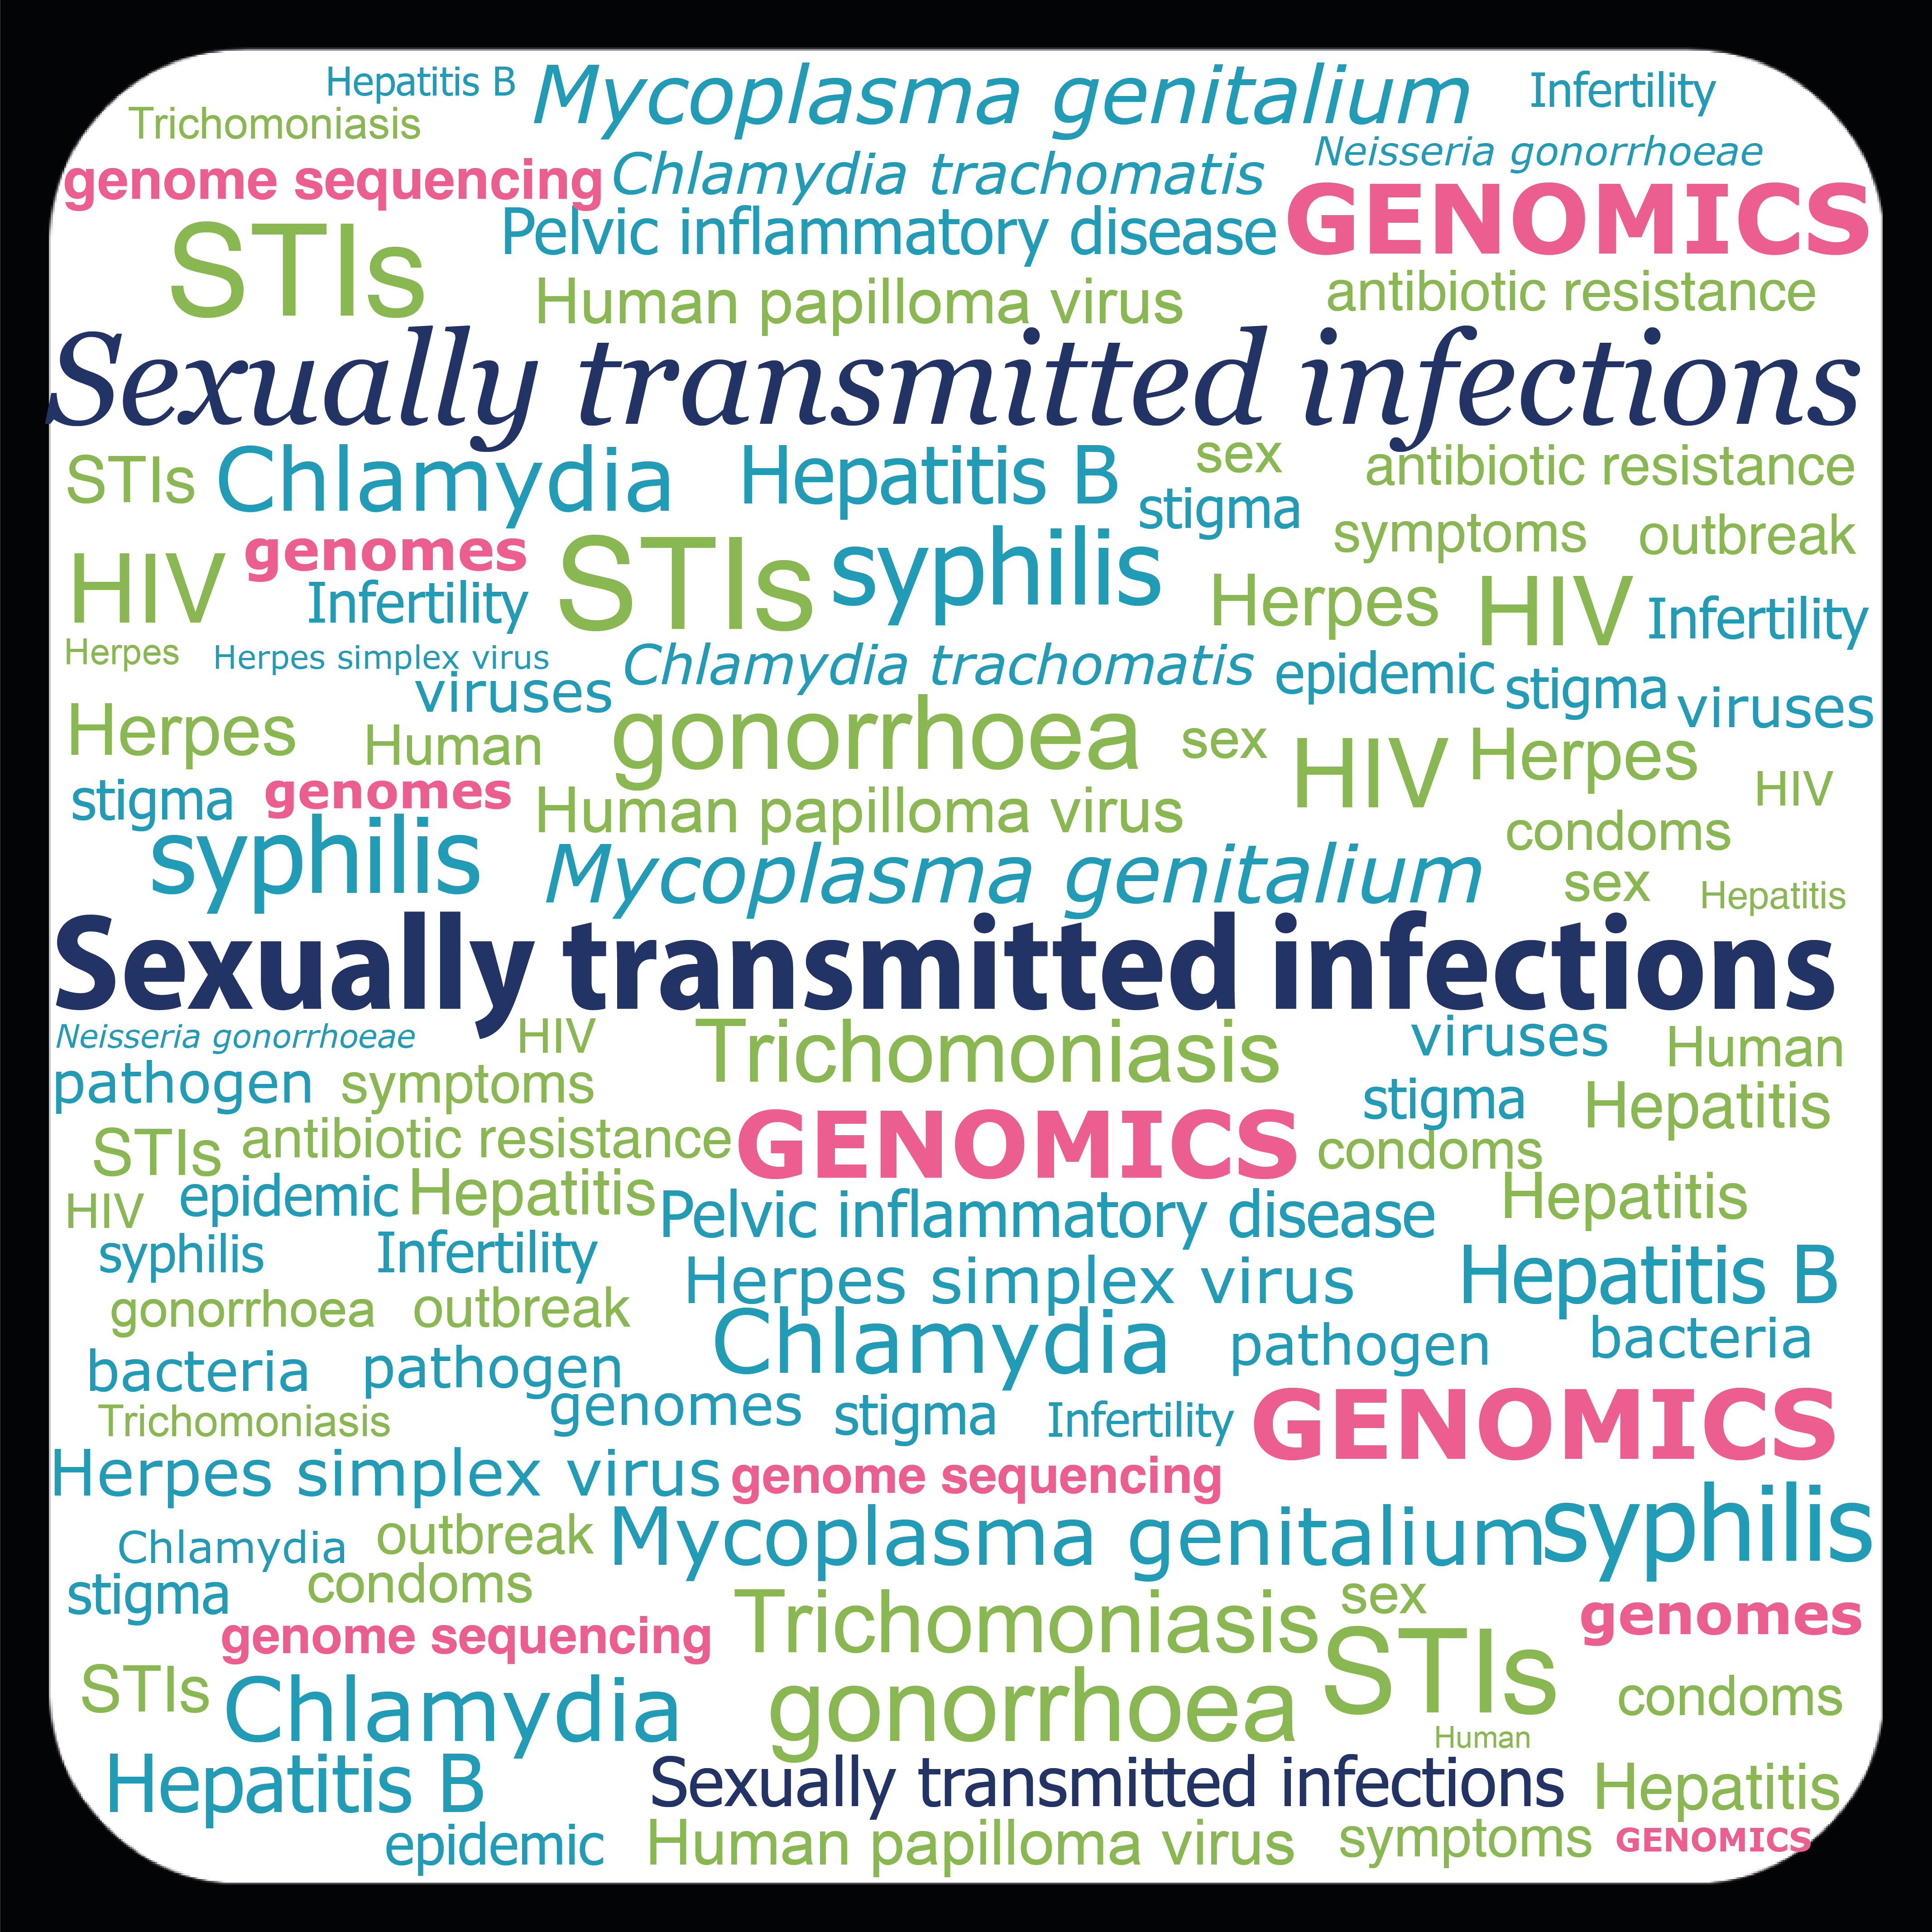 image of Microbial Genomics of Sexually Transmitted Infections